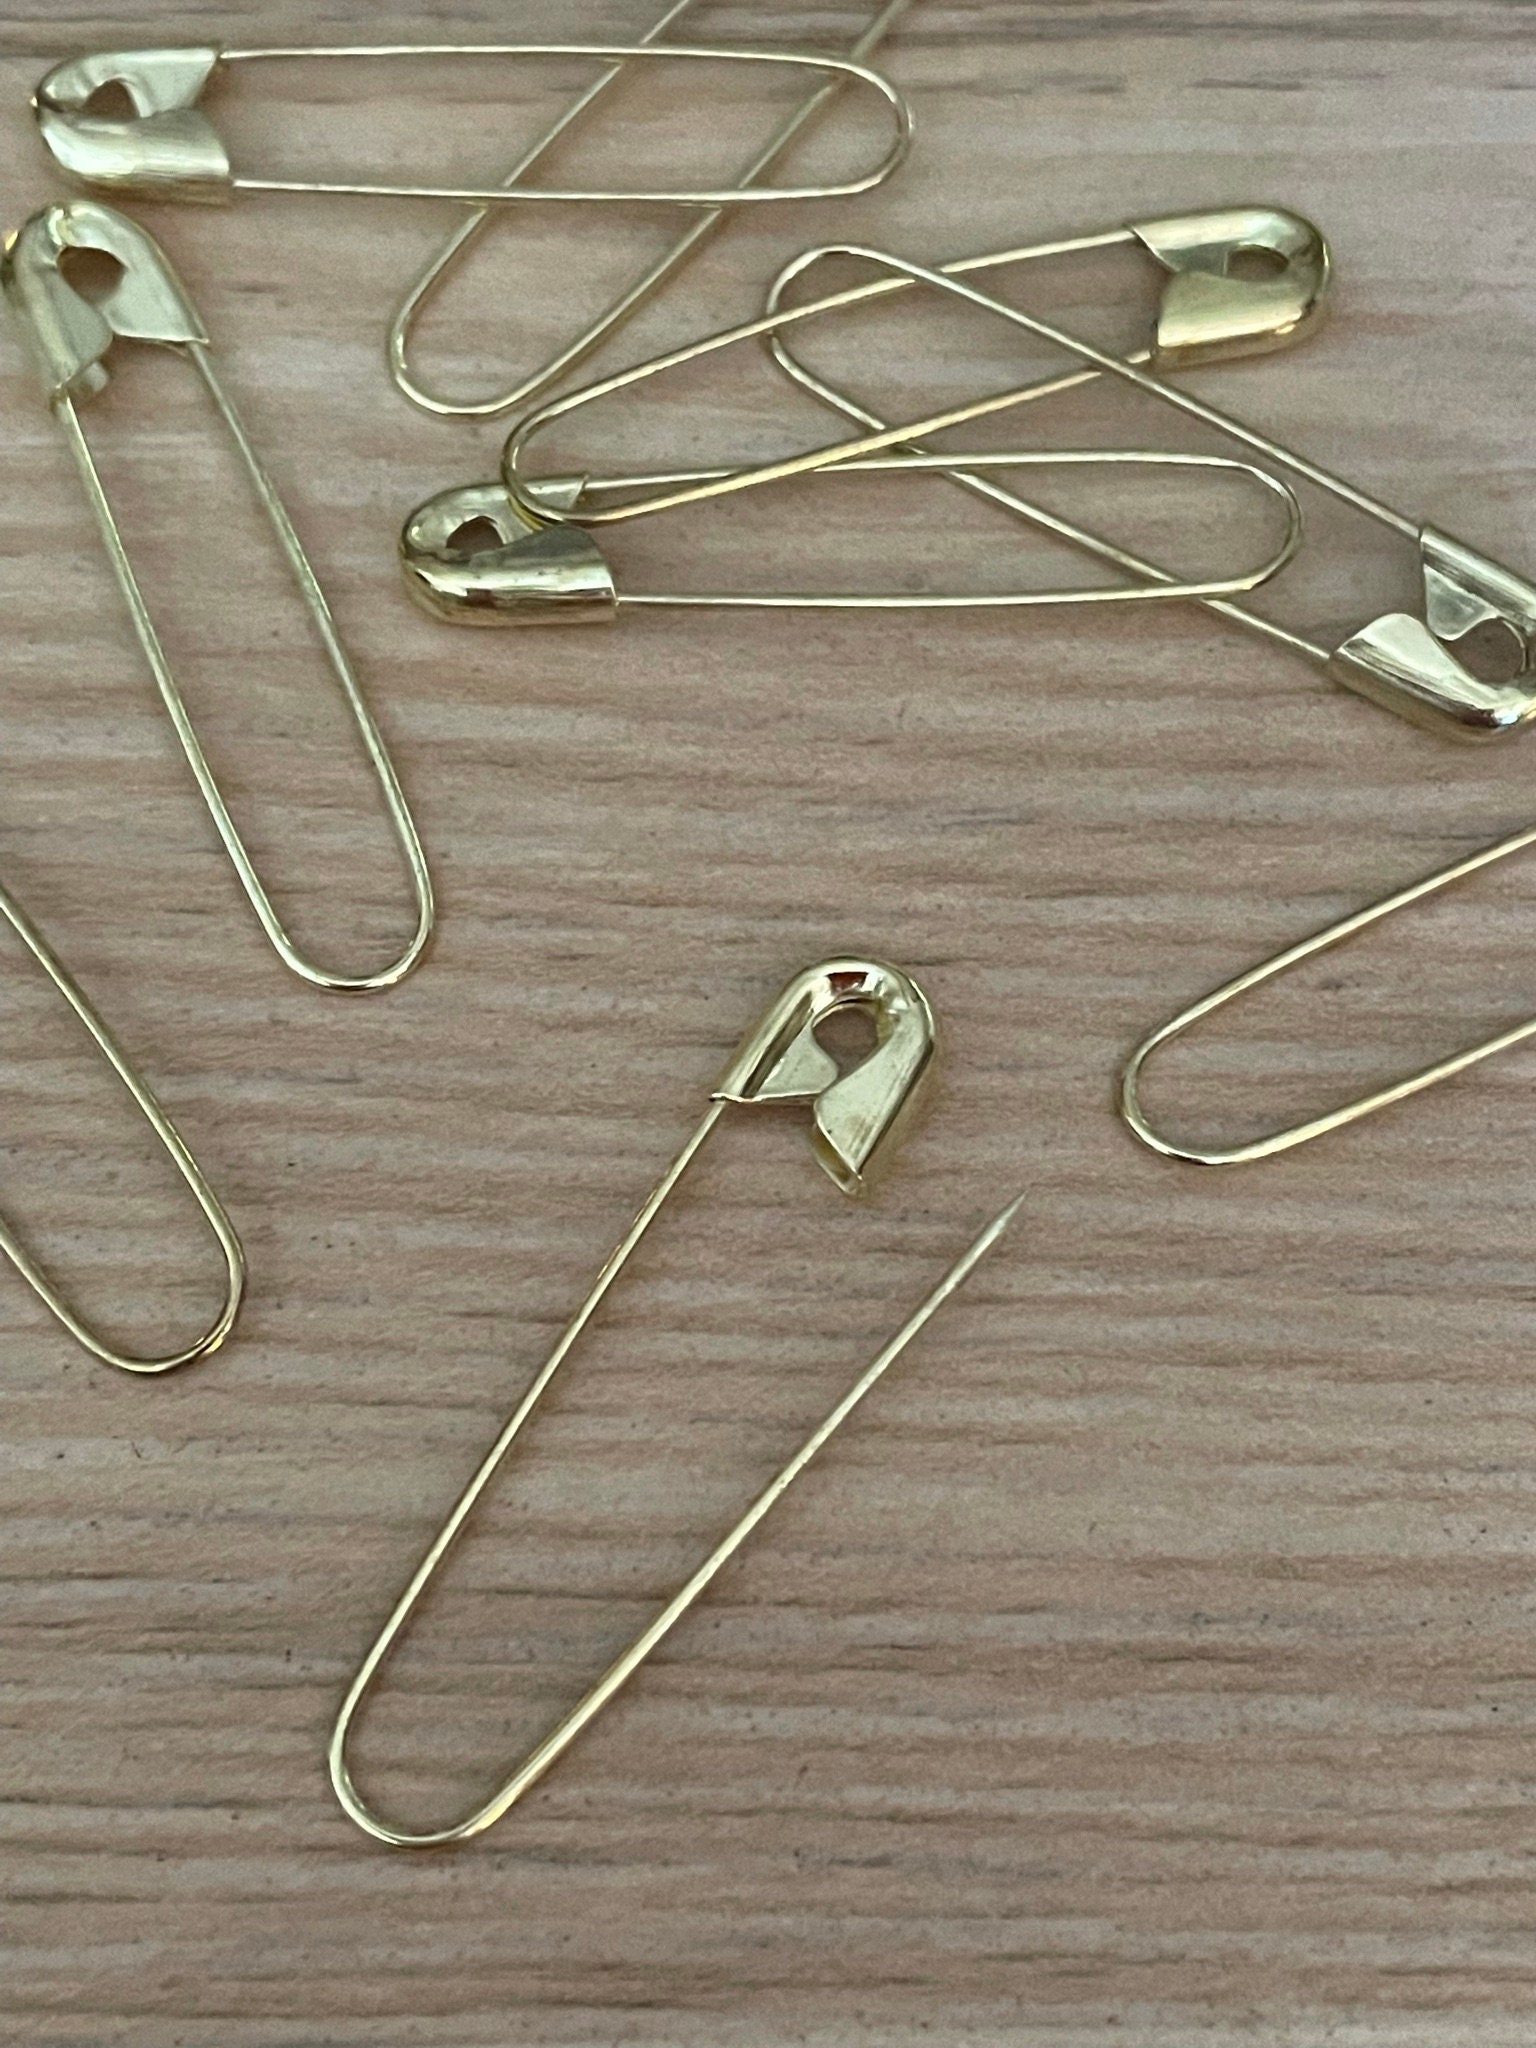 Coiless Safety Pin Large Gold - 82676752452